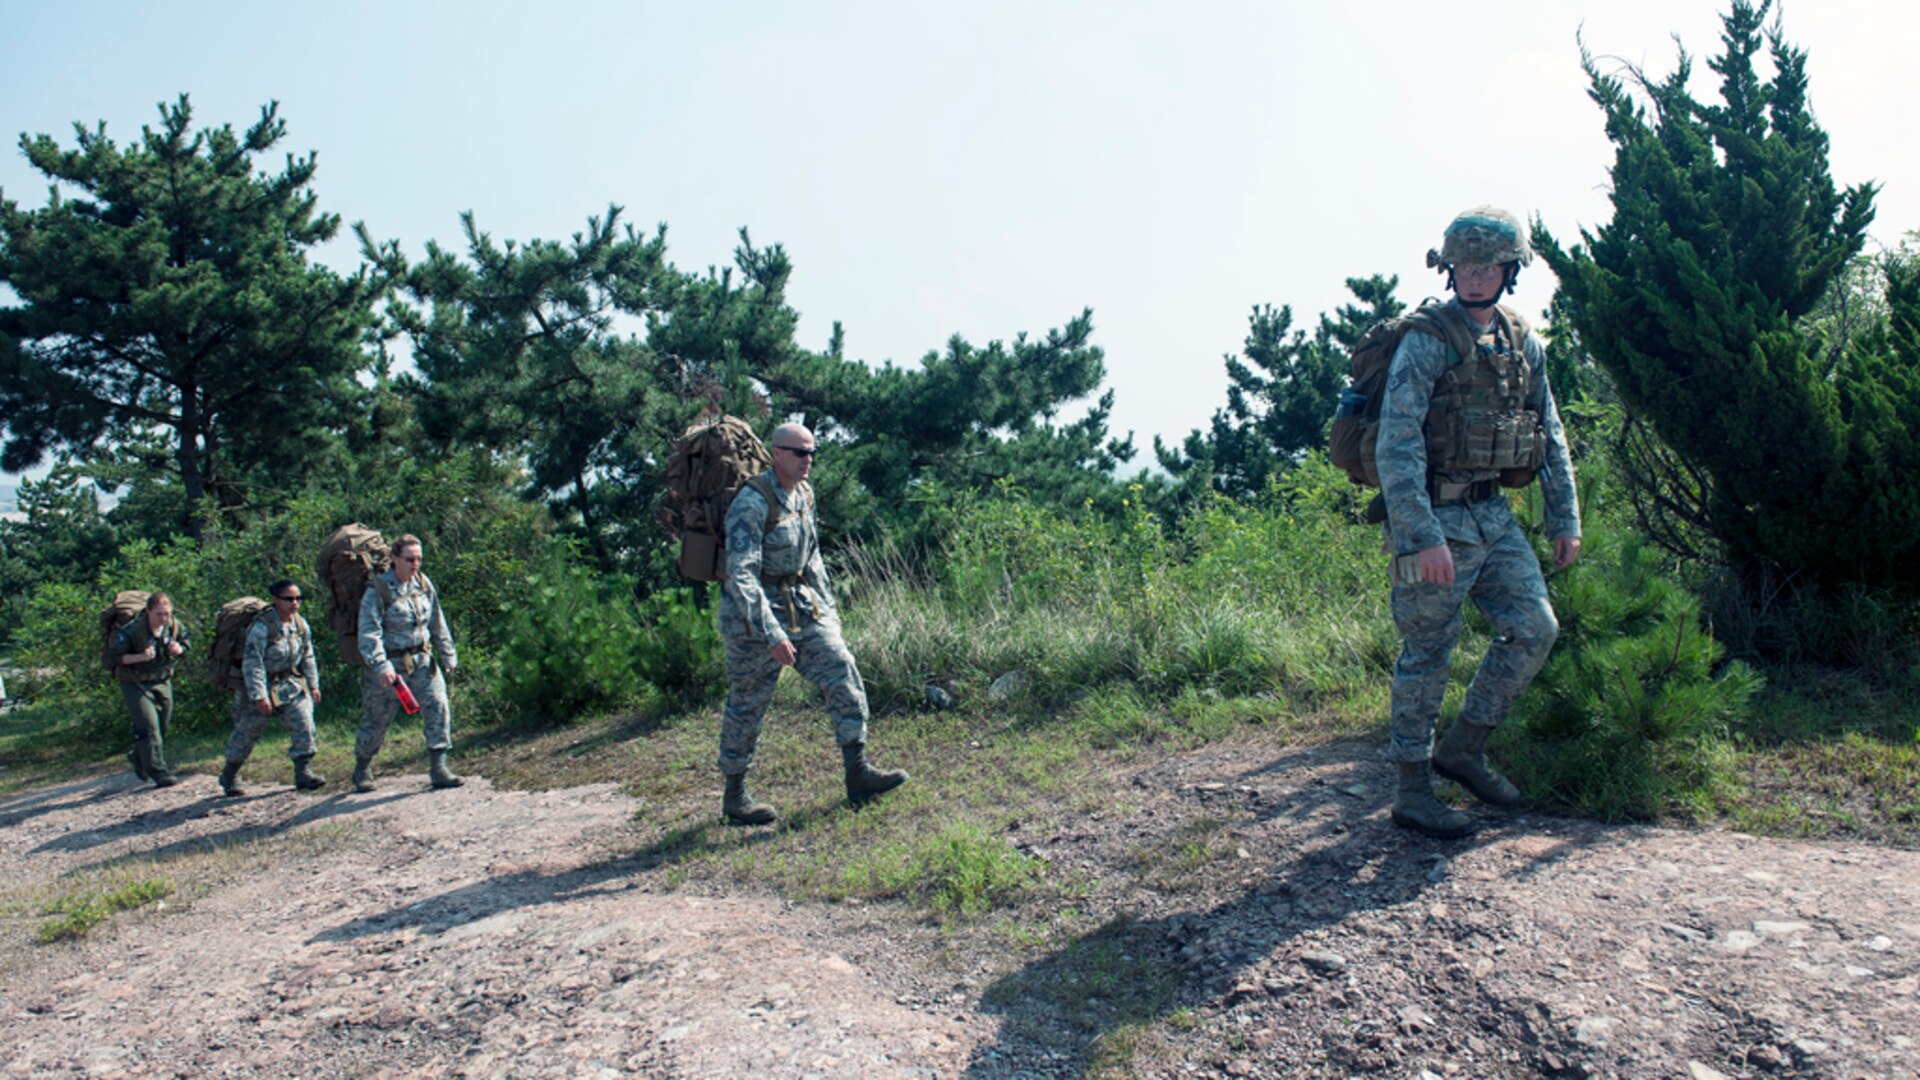 KUNSAN AIR BASE, Republic of Korea (Aug. 6, 2015) - Staff Sgt. Matthew Edge, 8th Civil Engineer Squadron explosive ordnance disposal technician (right), searches the ground for an improvised explosive device as Chief Master Sgt. David "Falcon Chief" Abell, 8th Mission Support Group superintendent, and Lt. Col. Aimee "Falcon II" Alvstad, 8th MSG deputy commander, provide security during combat EOD training.  Alvstad and Abell witnessed the detection, identification, recovery and disposal of a simulated IED during a training operation conducted by U.S. Air Force explosive ordnance disposal technicians of the 8th CES as part of their hands-on immersion to the Wolf Pack. 